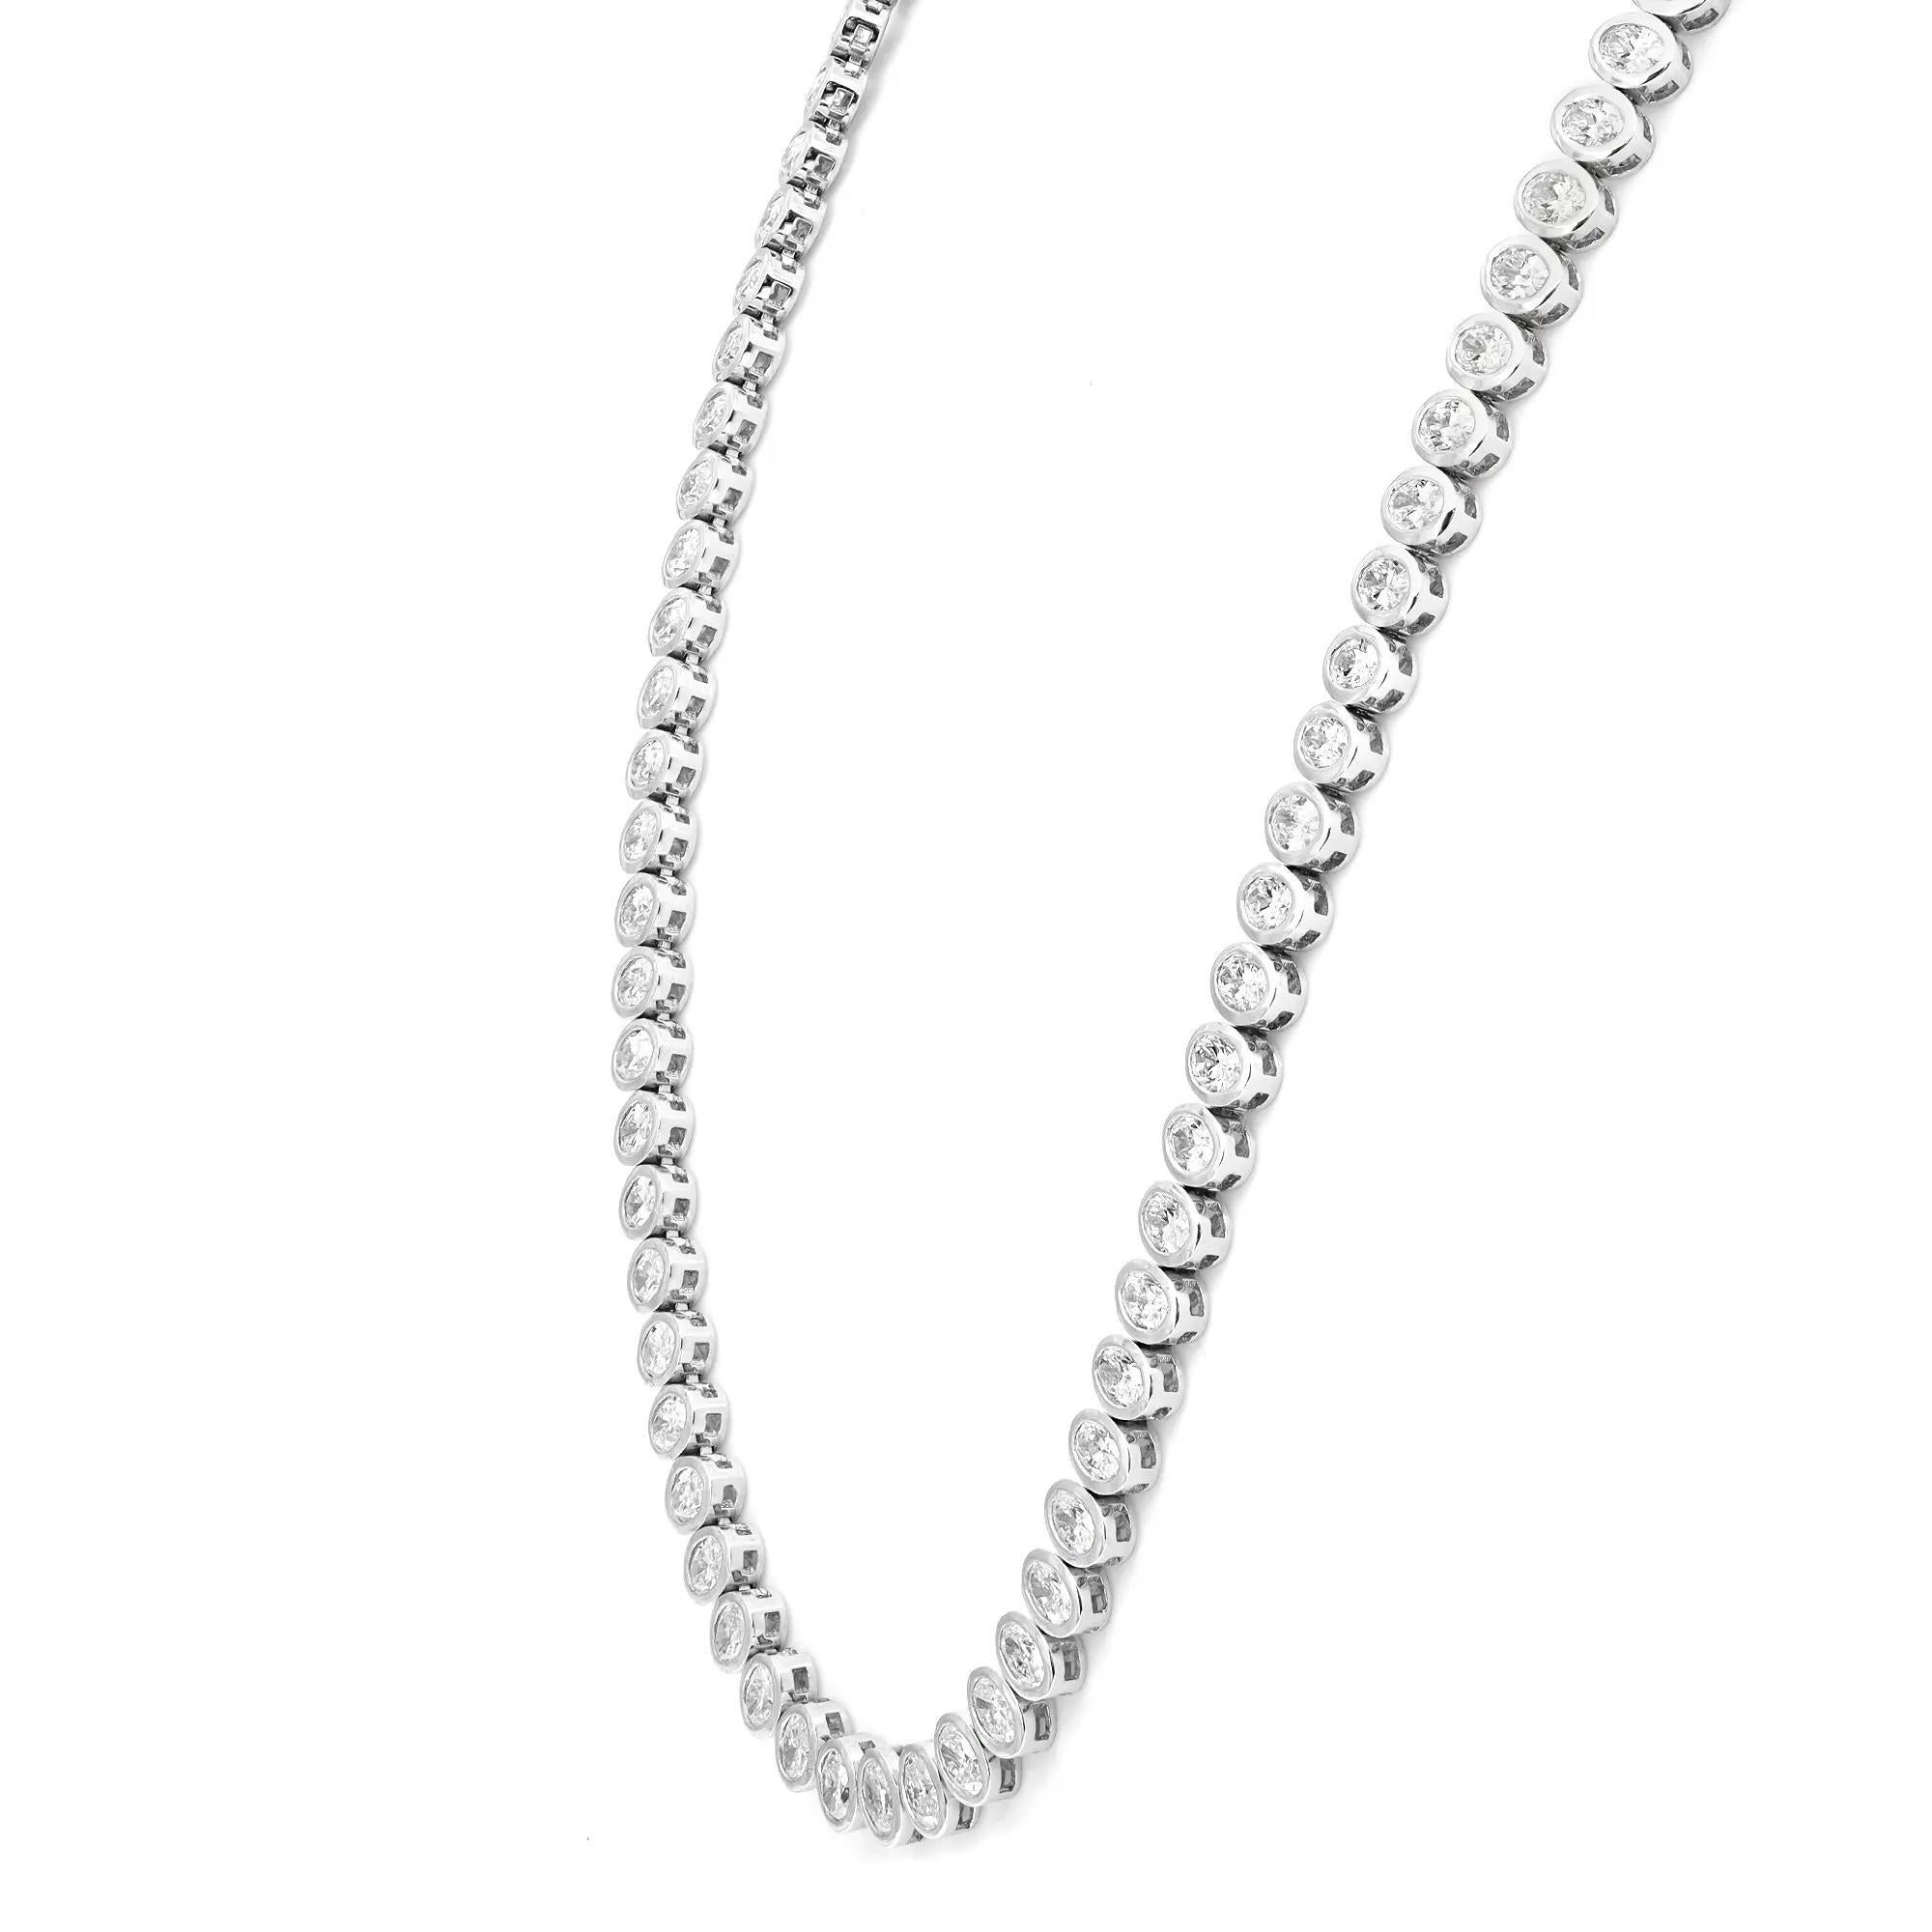 A classic diamond single-line tennis necklace is an iconic essential that always remains in fashion. This elegant and alluring necklace features 55 bezel set bright white oval cut diamonds weighing 7.94 carats in total. Crafted in 18K white gold.